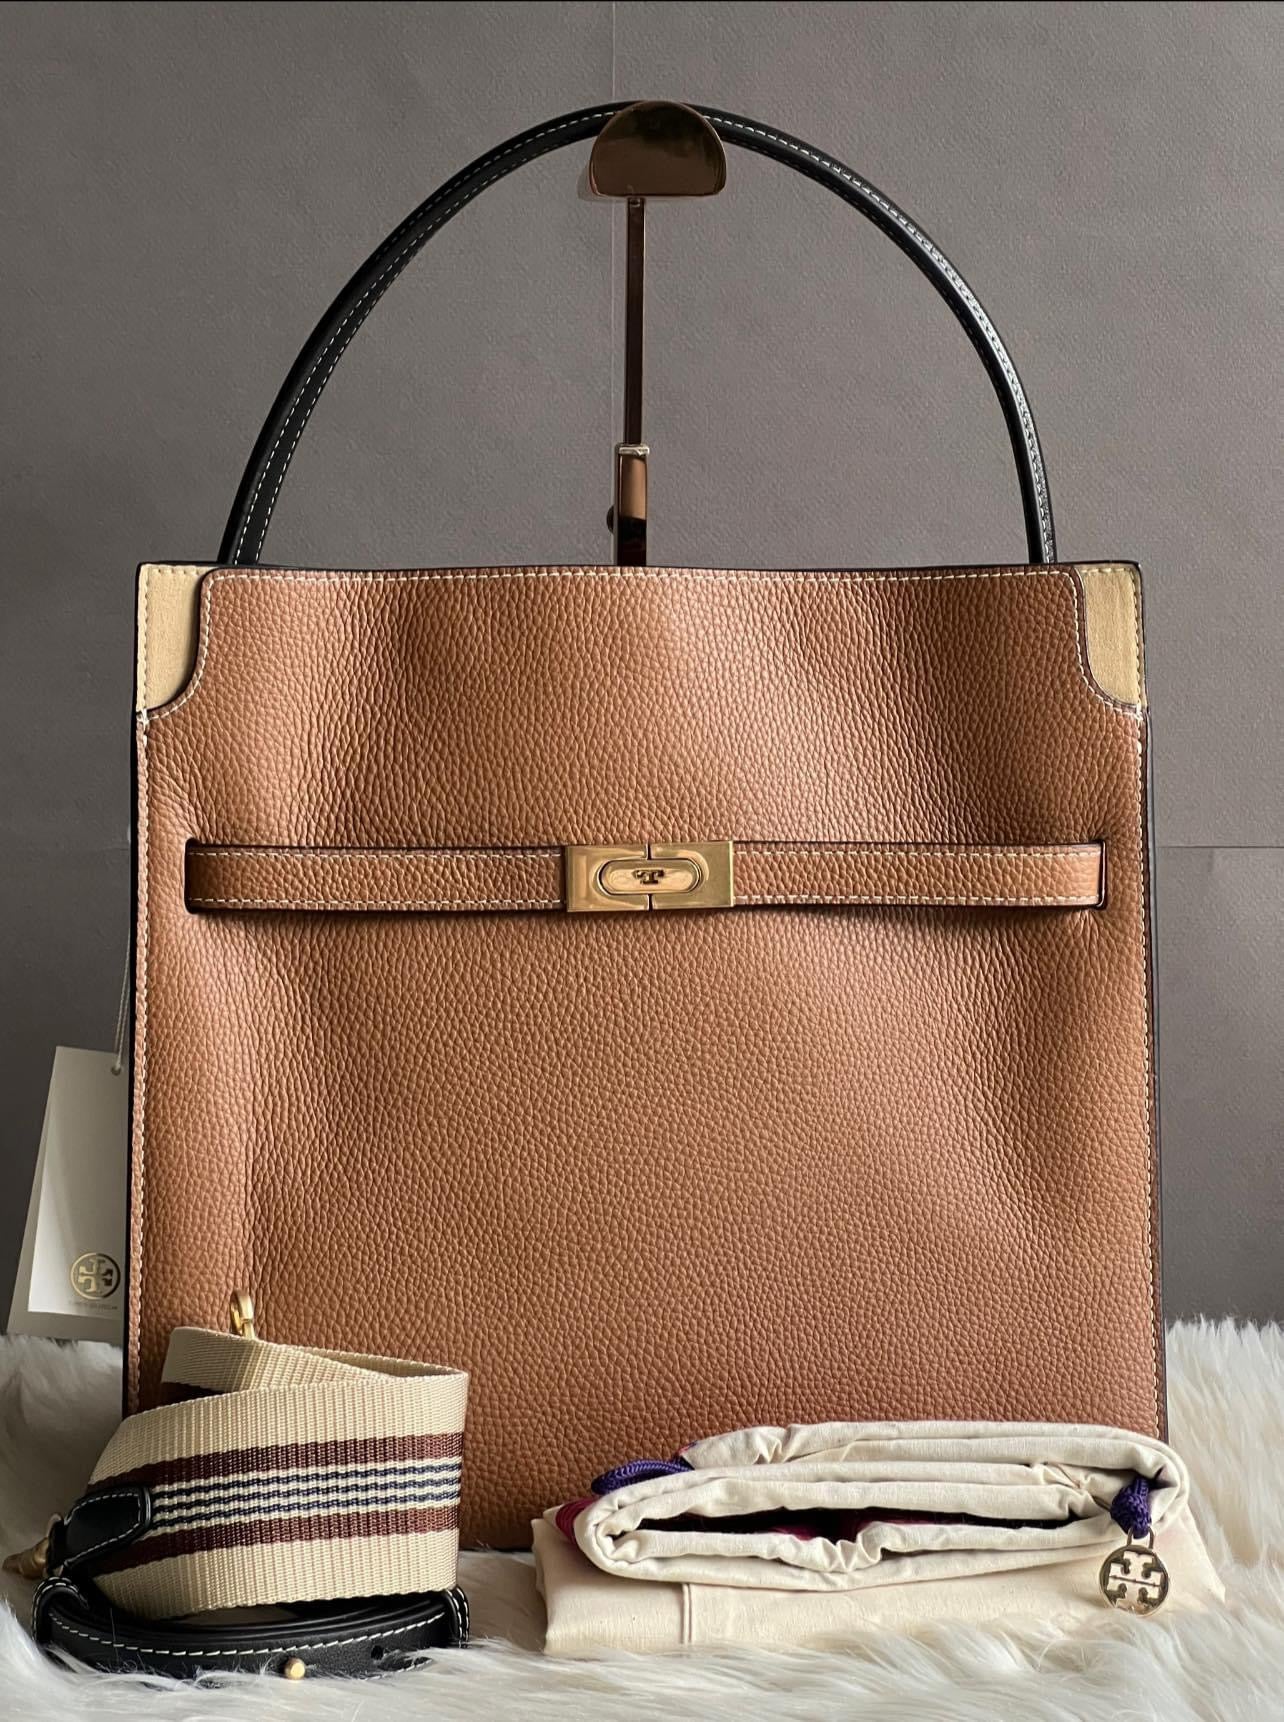 Tory Burch Lee Radziwill Pebbled Double Bag